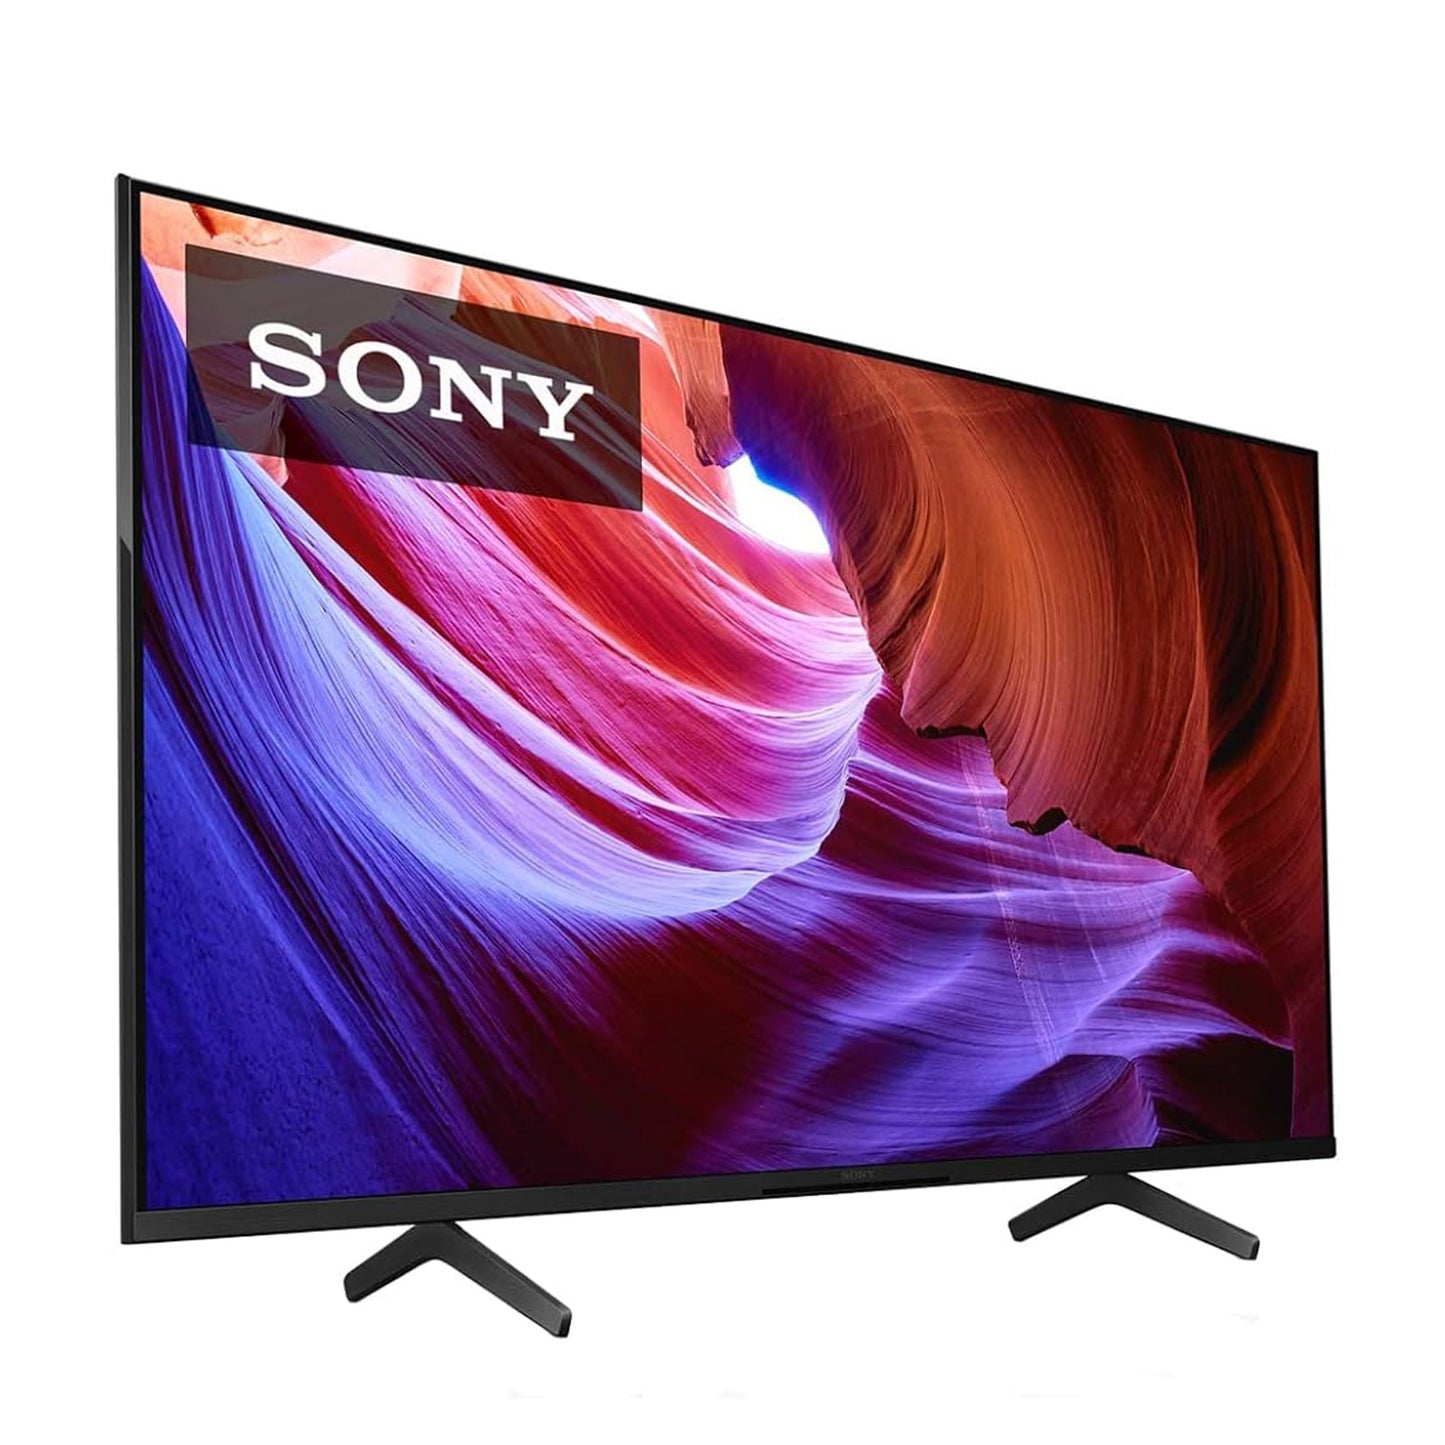 Sony 75" Android Smart TV - 4K - 120Hz